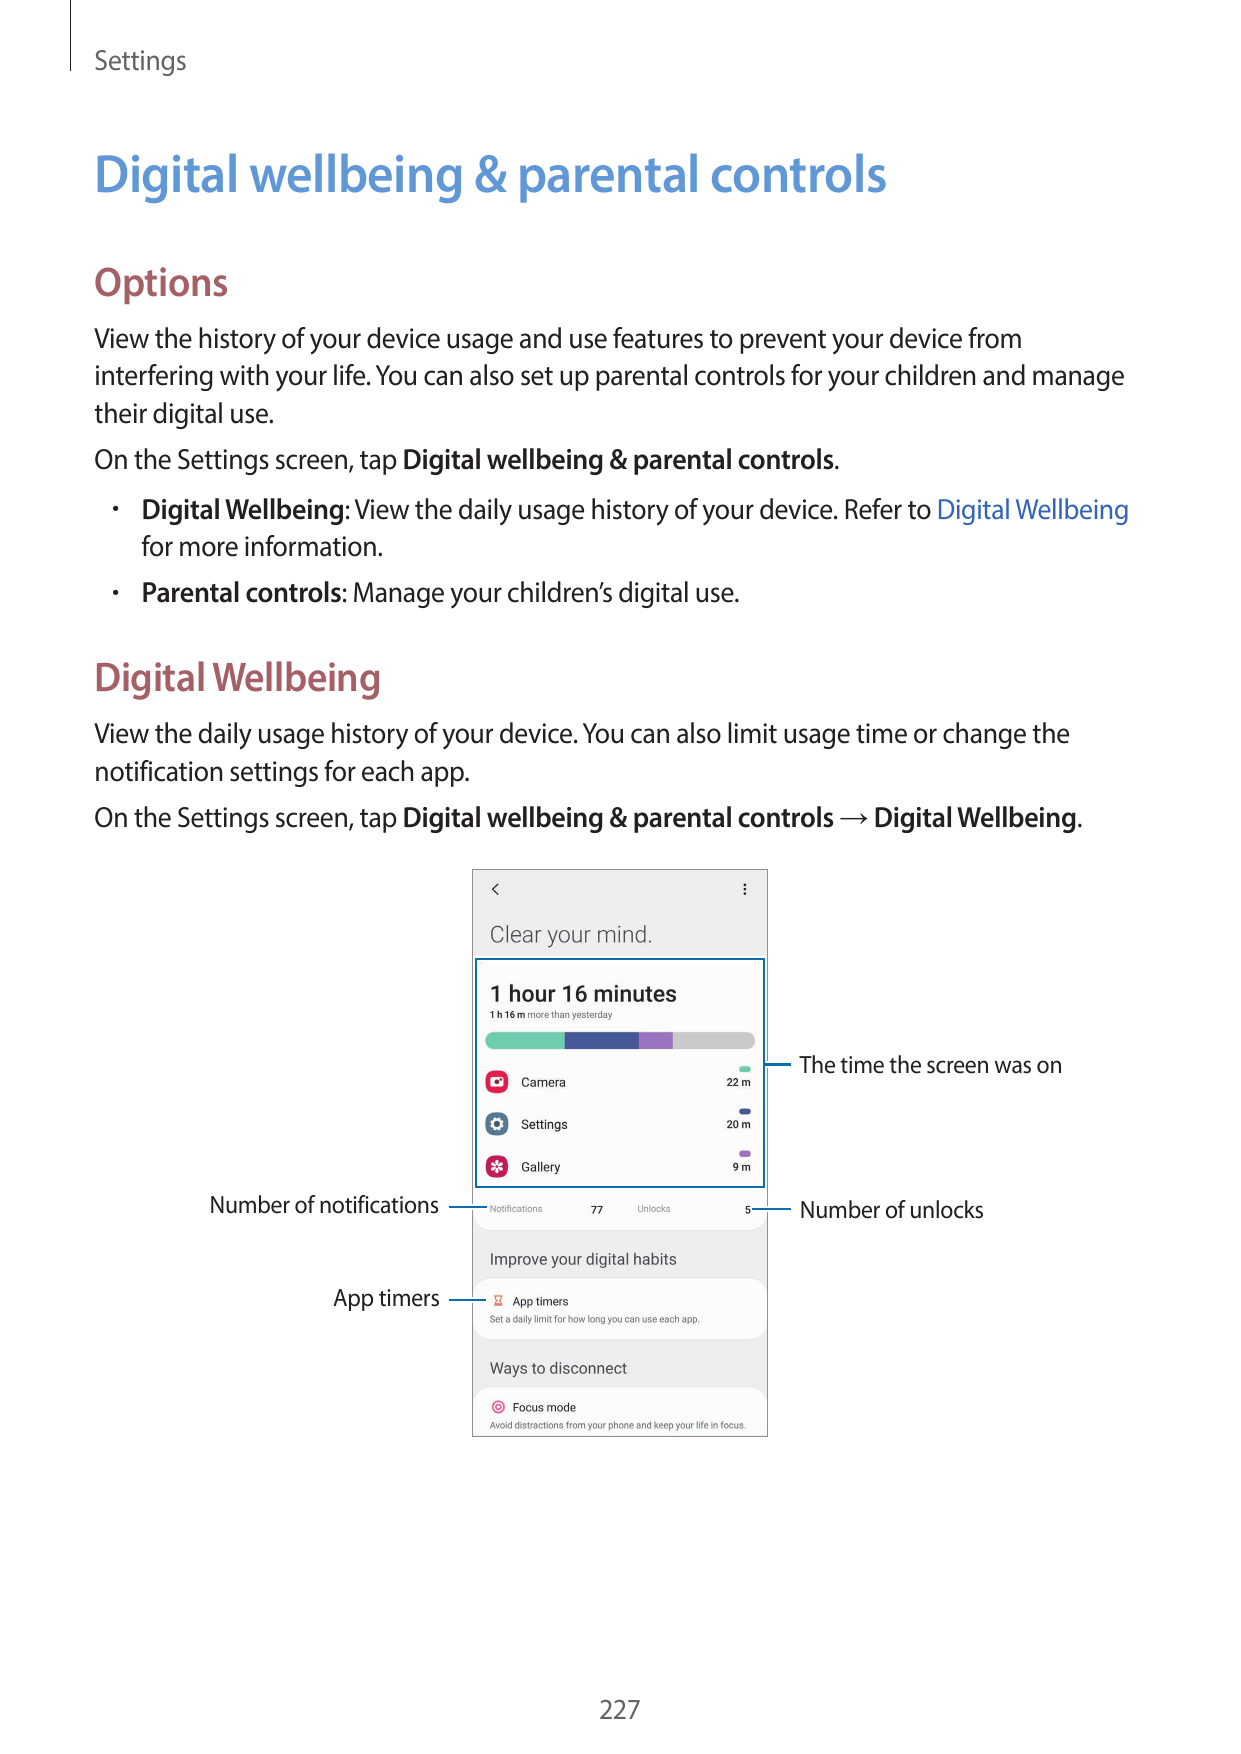 SettingsDigital wellbeing & parental controlsOptionsView the history of your device usage and use features to prevent your devic